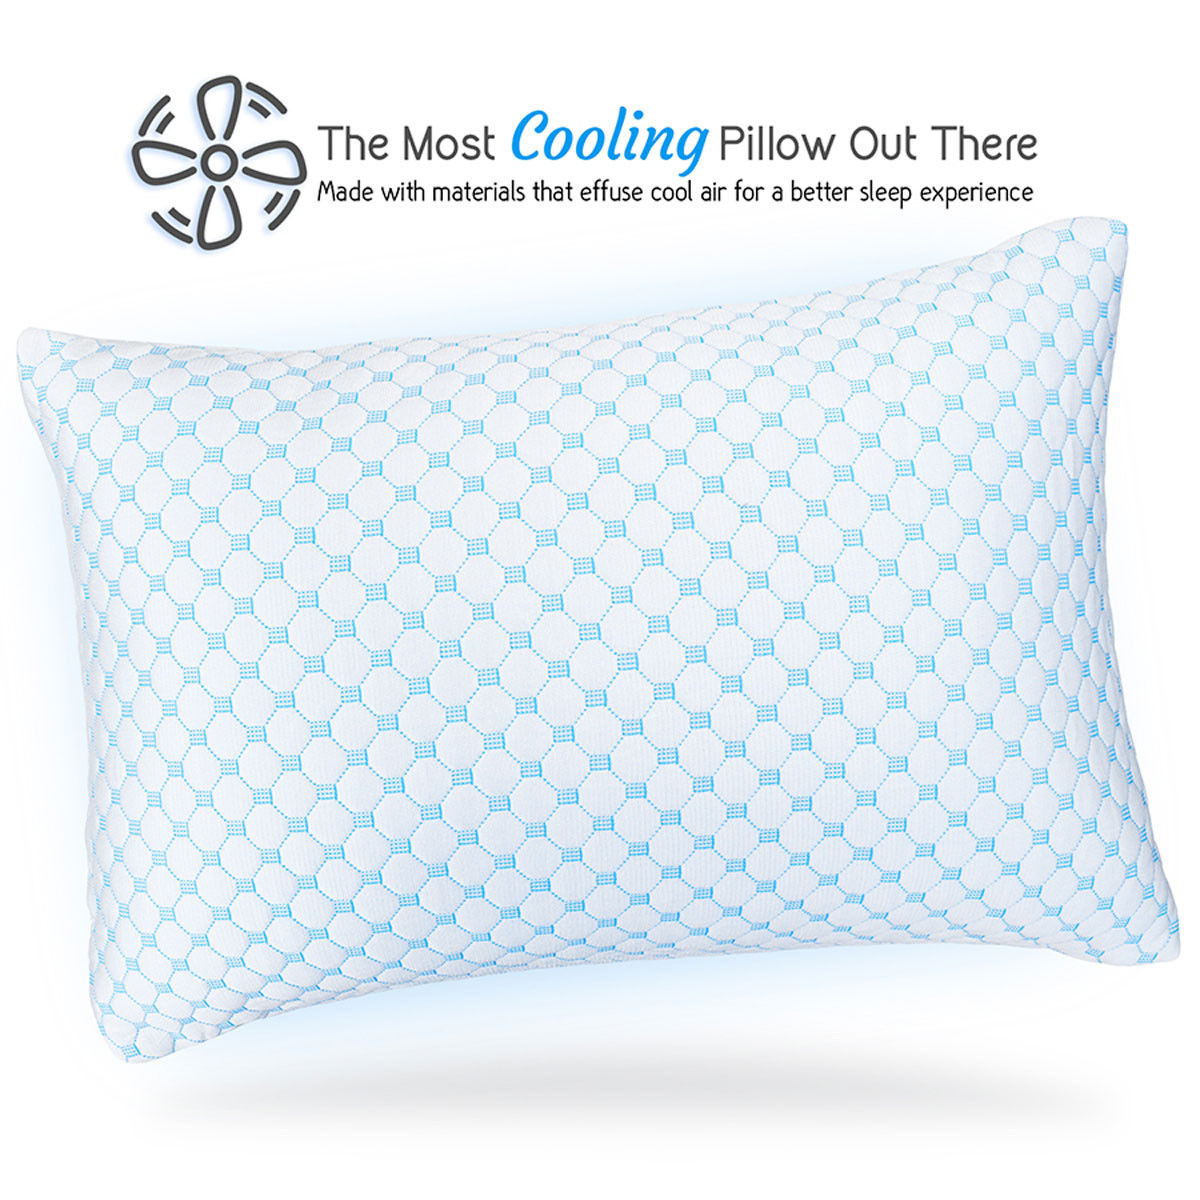 Can Clara Clark pillow be reversed to a different material?